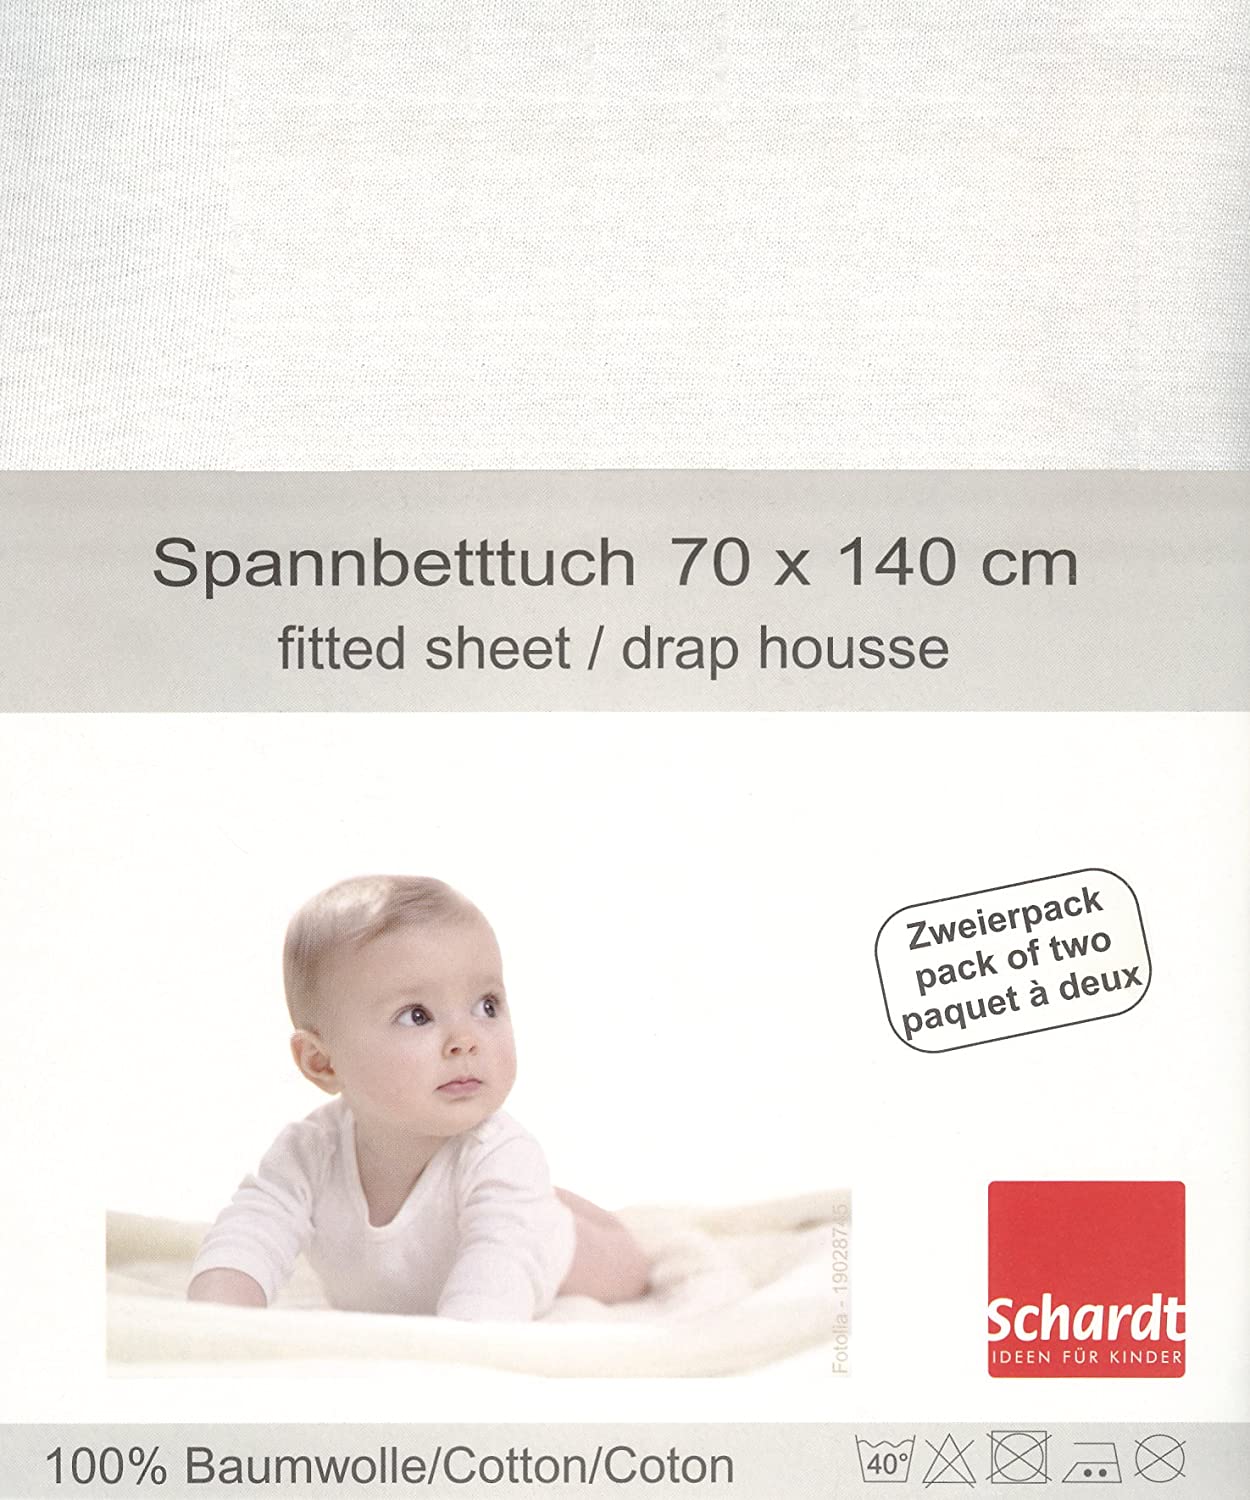 Schardt 13 851 11 Jersey Fitted Sheet, Pack of 2, White